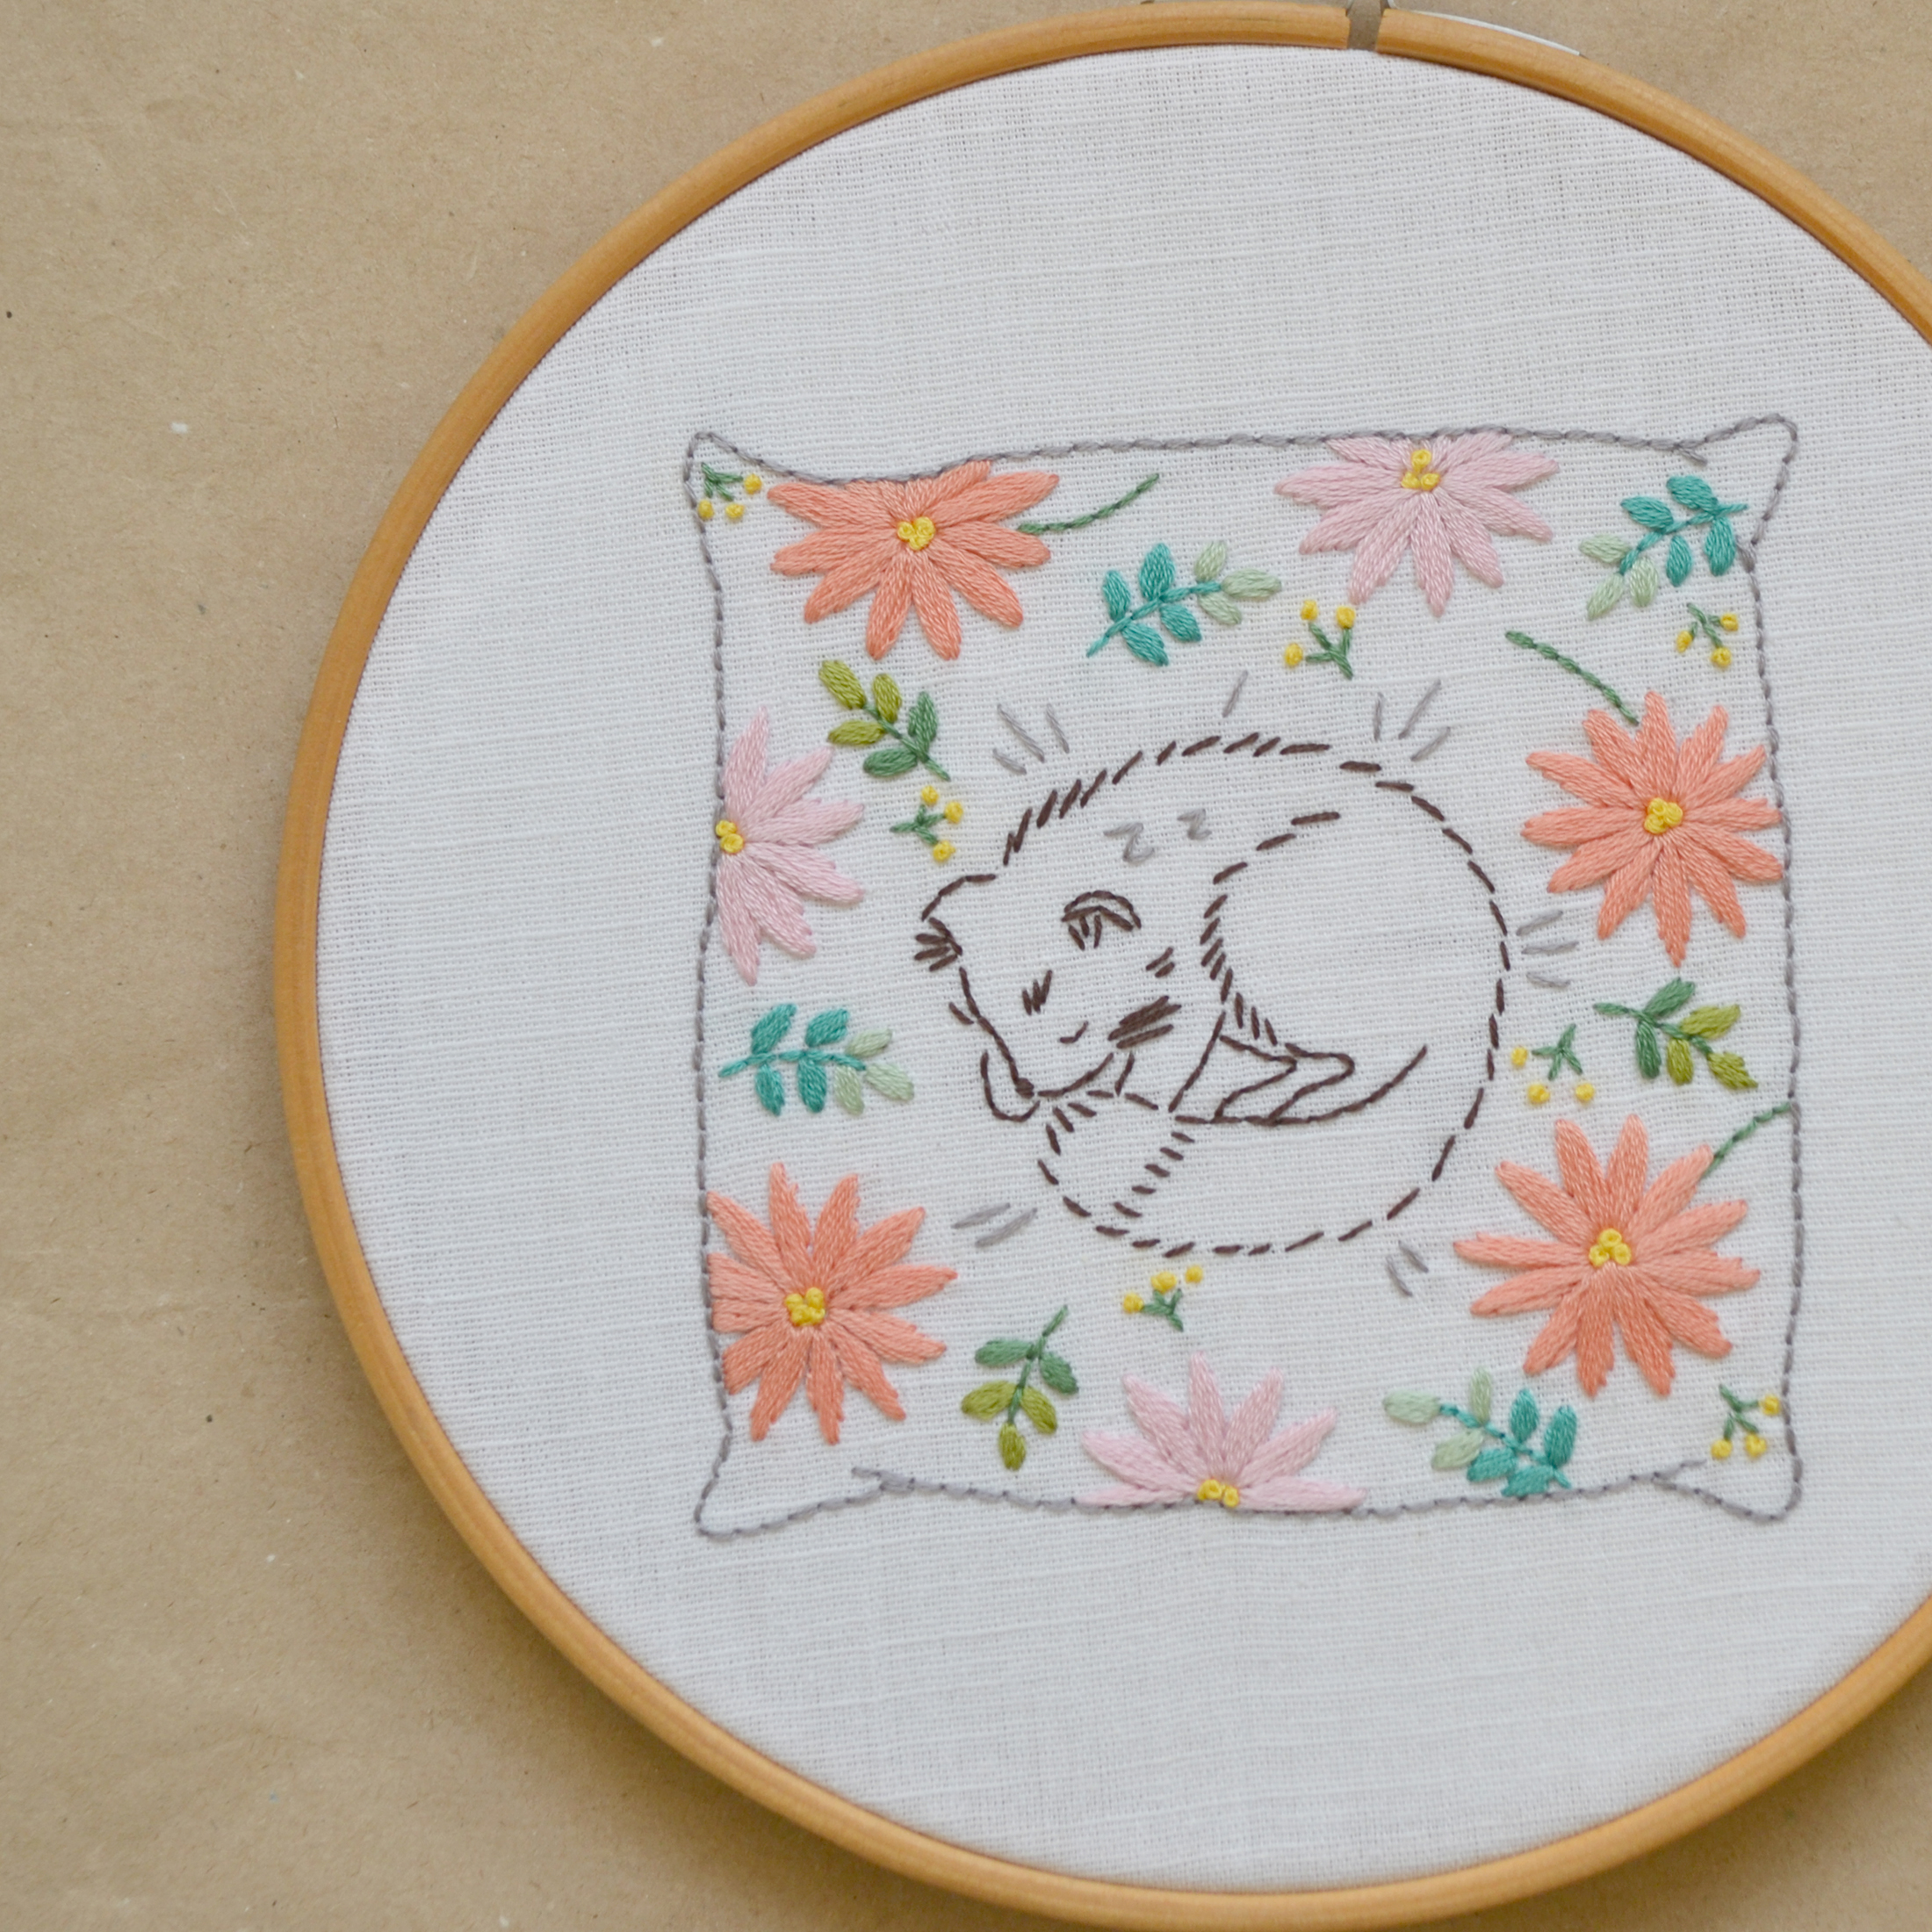 Getting Stitched on the Farm: Transferring Hand Embroidery Designs